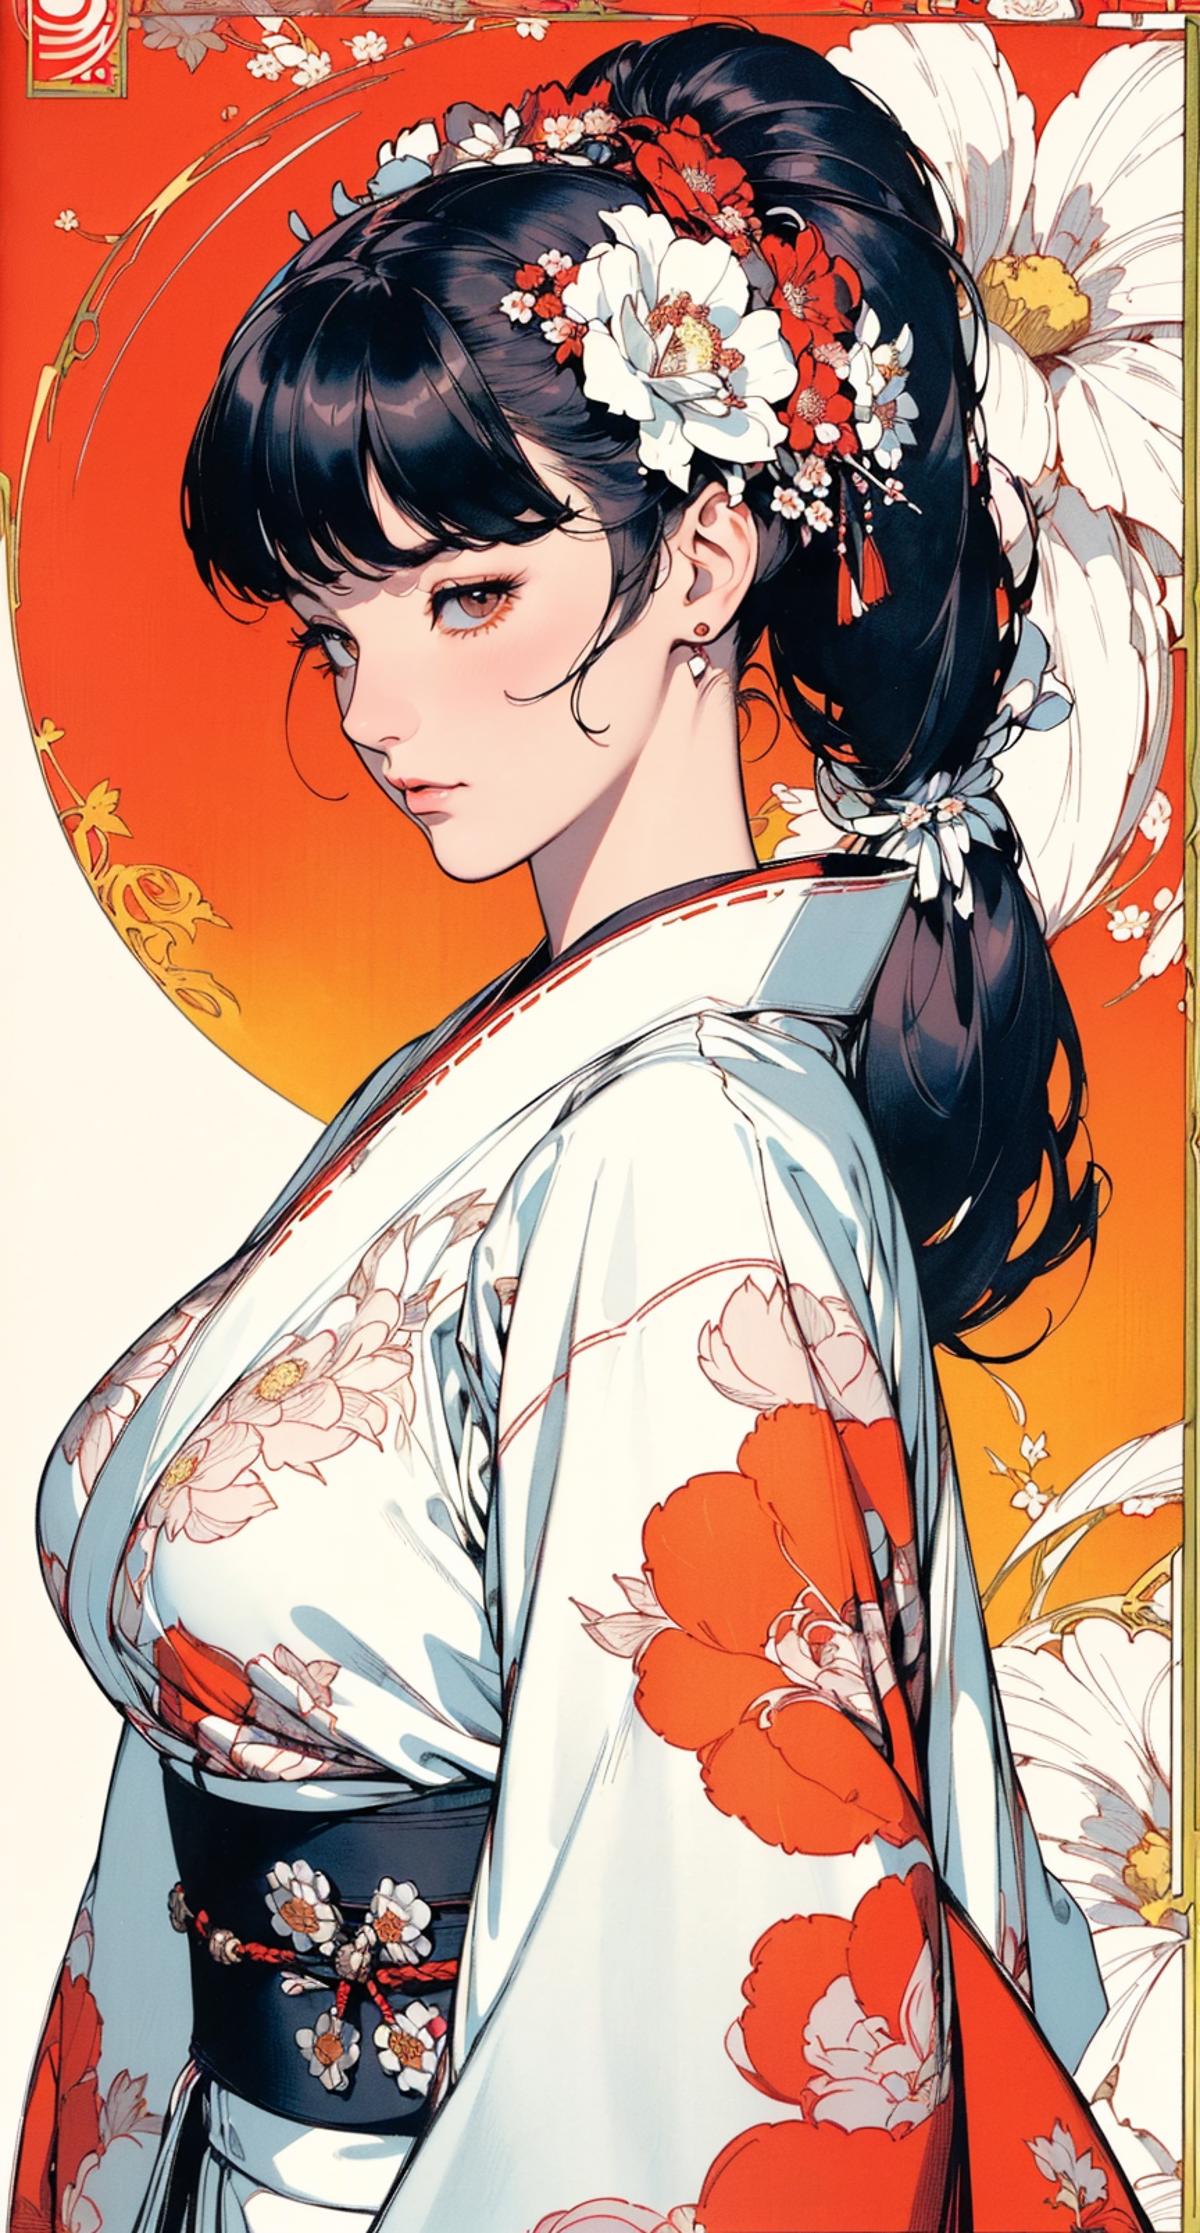 Anime-inspired illustration of a woman with a flower design on her kimono.